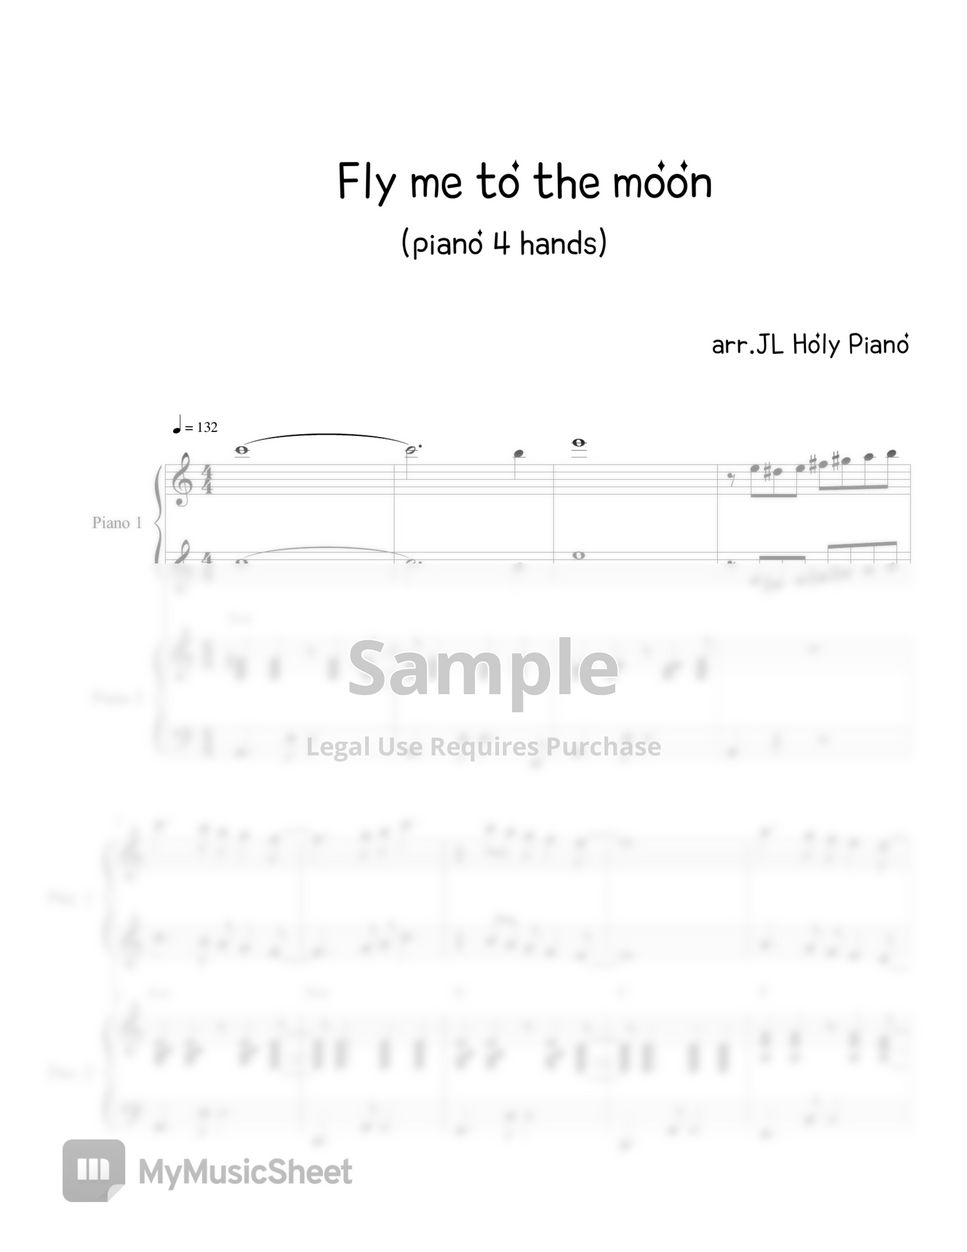 Bart Howard - Fly me to the moon by JL Holy Paino